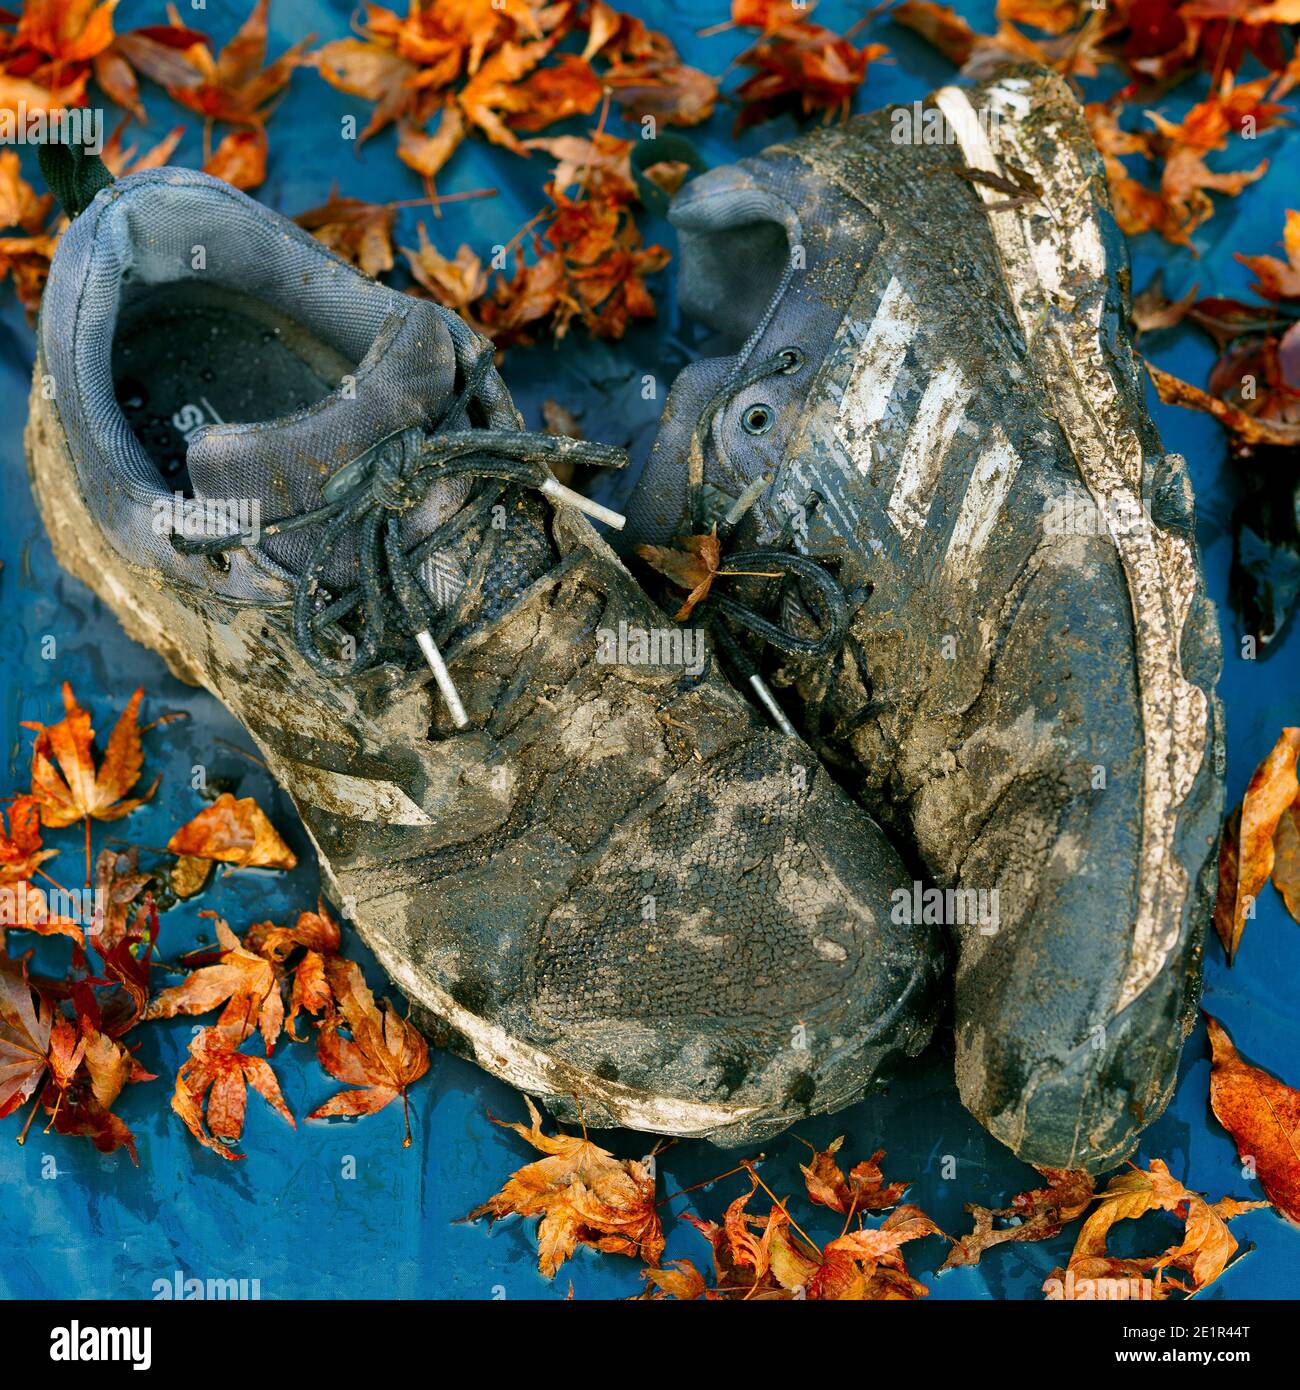 Men's Muddy Adidas Running Shoes, Adidas Surrounded by Autumn leaves. Adidas Galaxy Shoes Stock Photo - Alamy